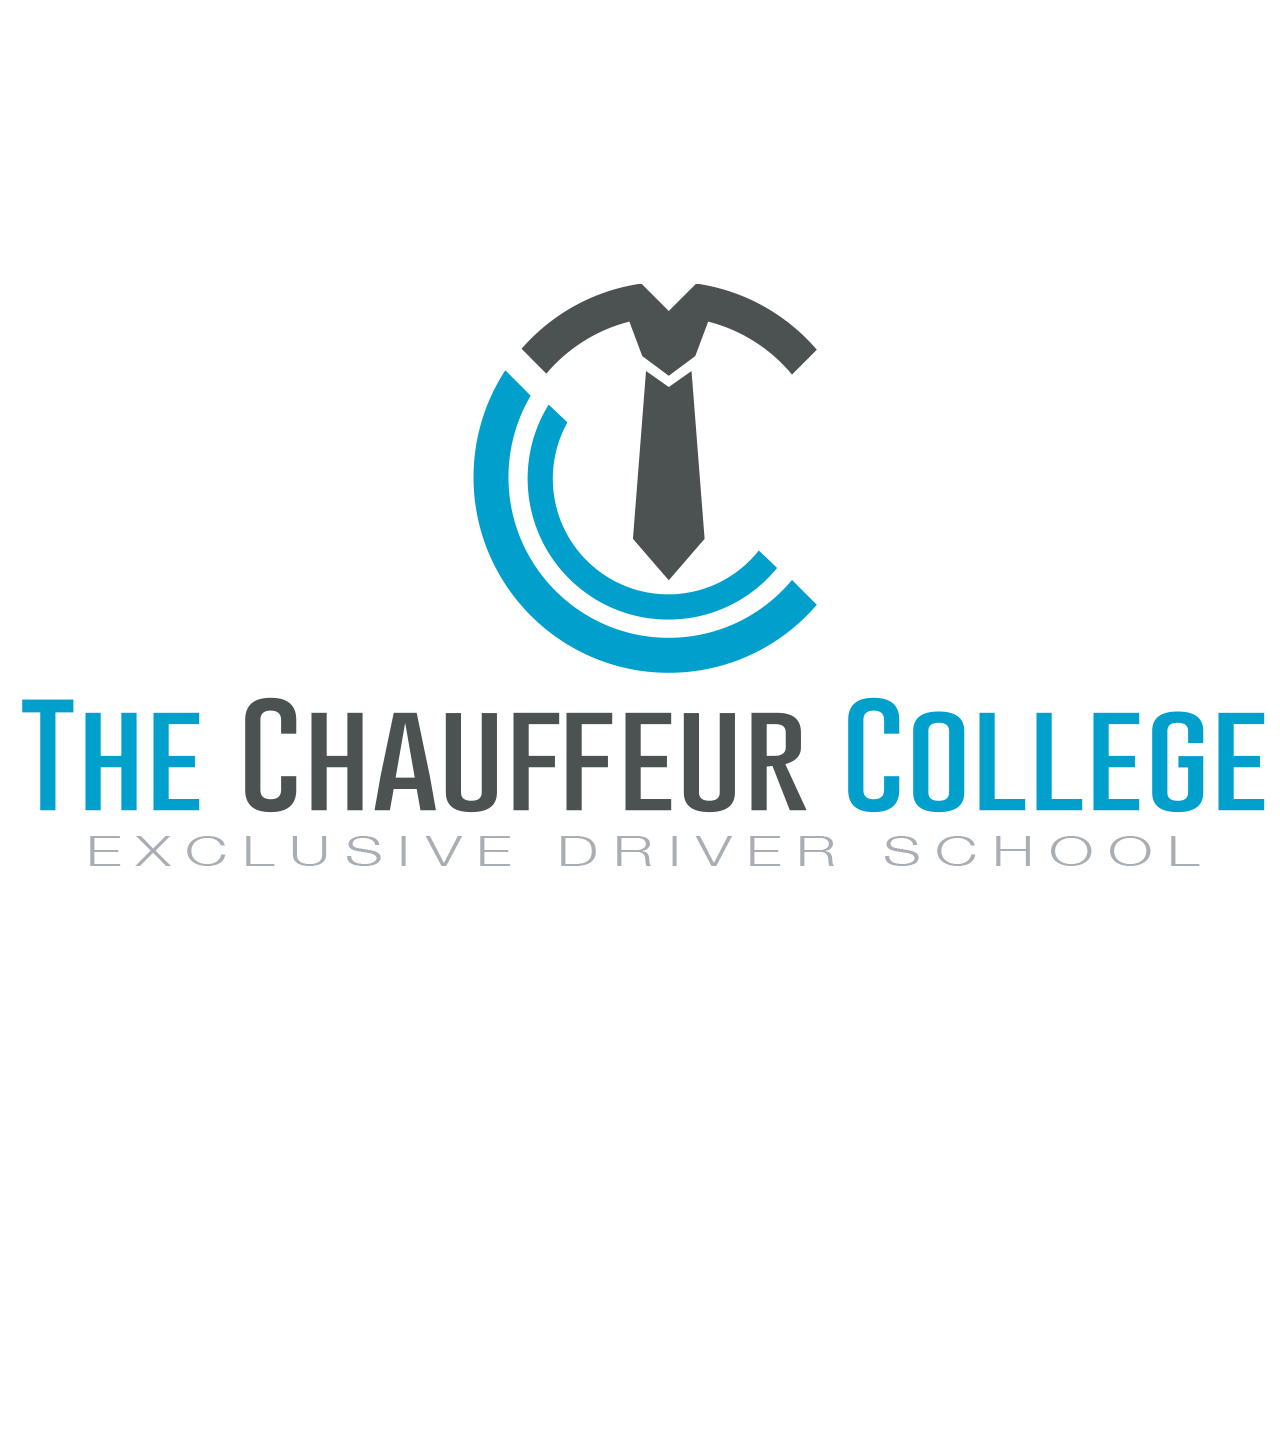 The Chauffeur College